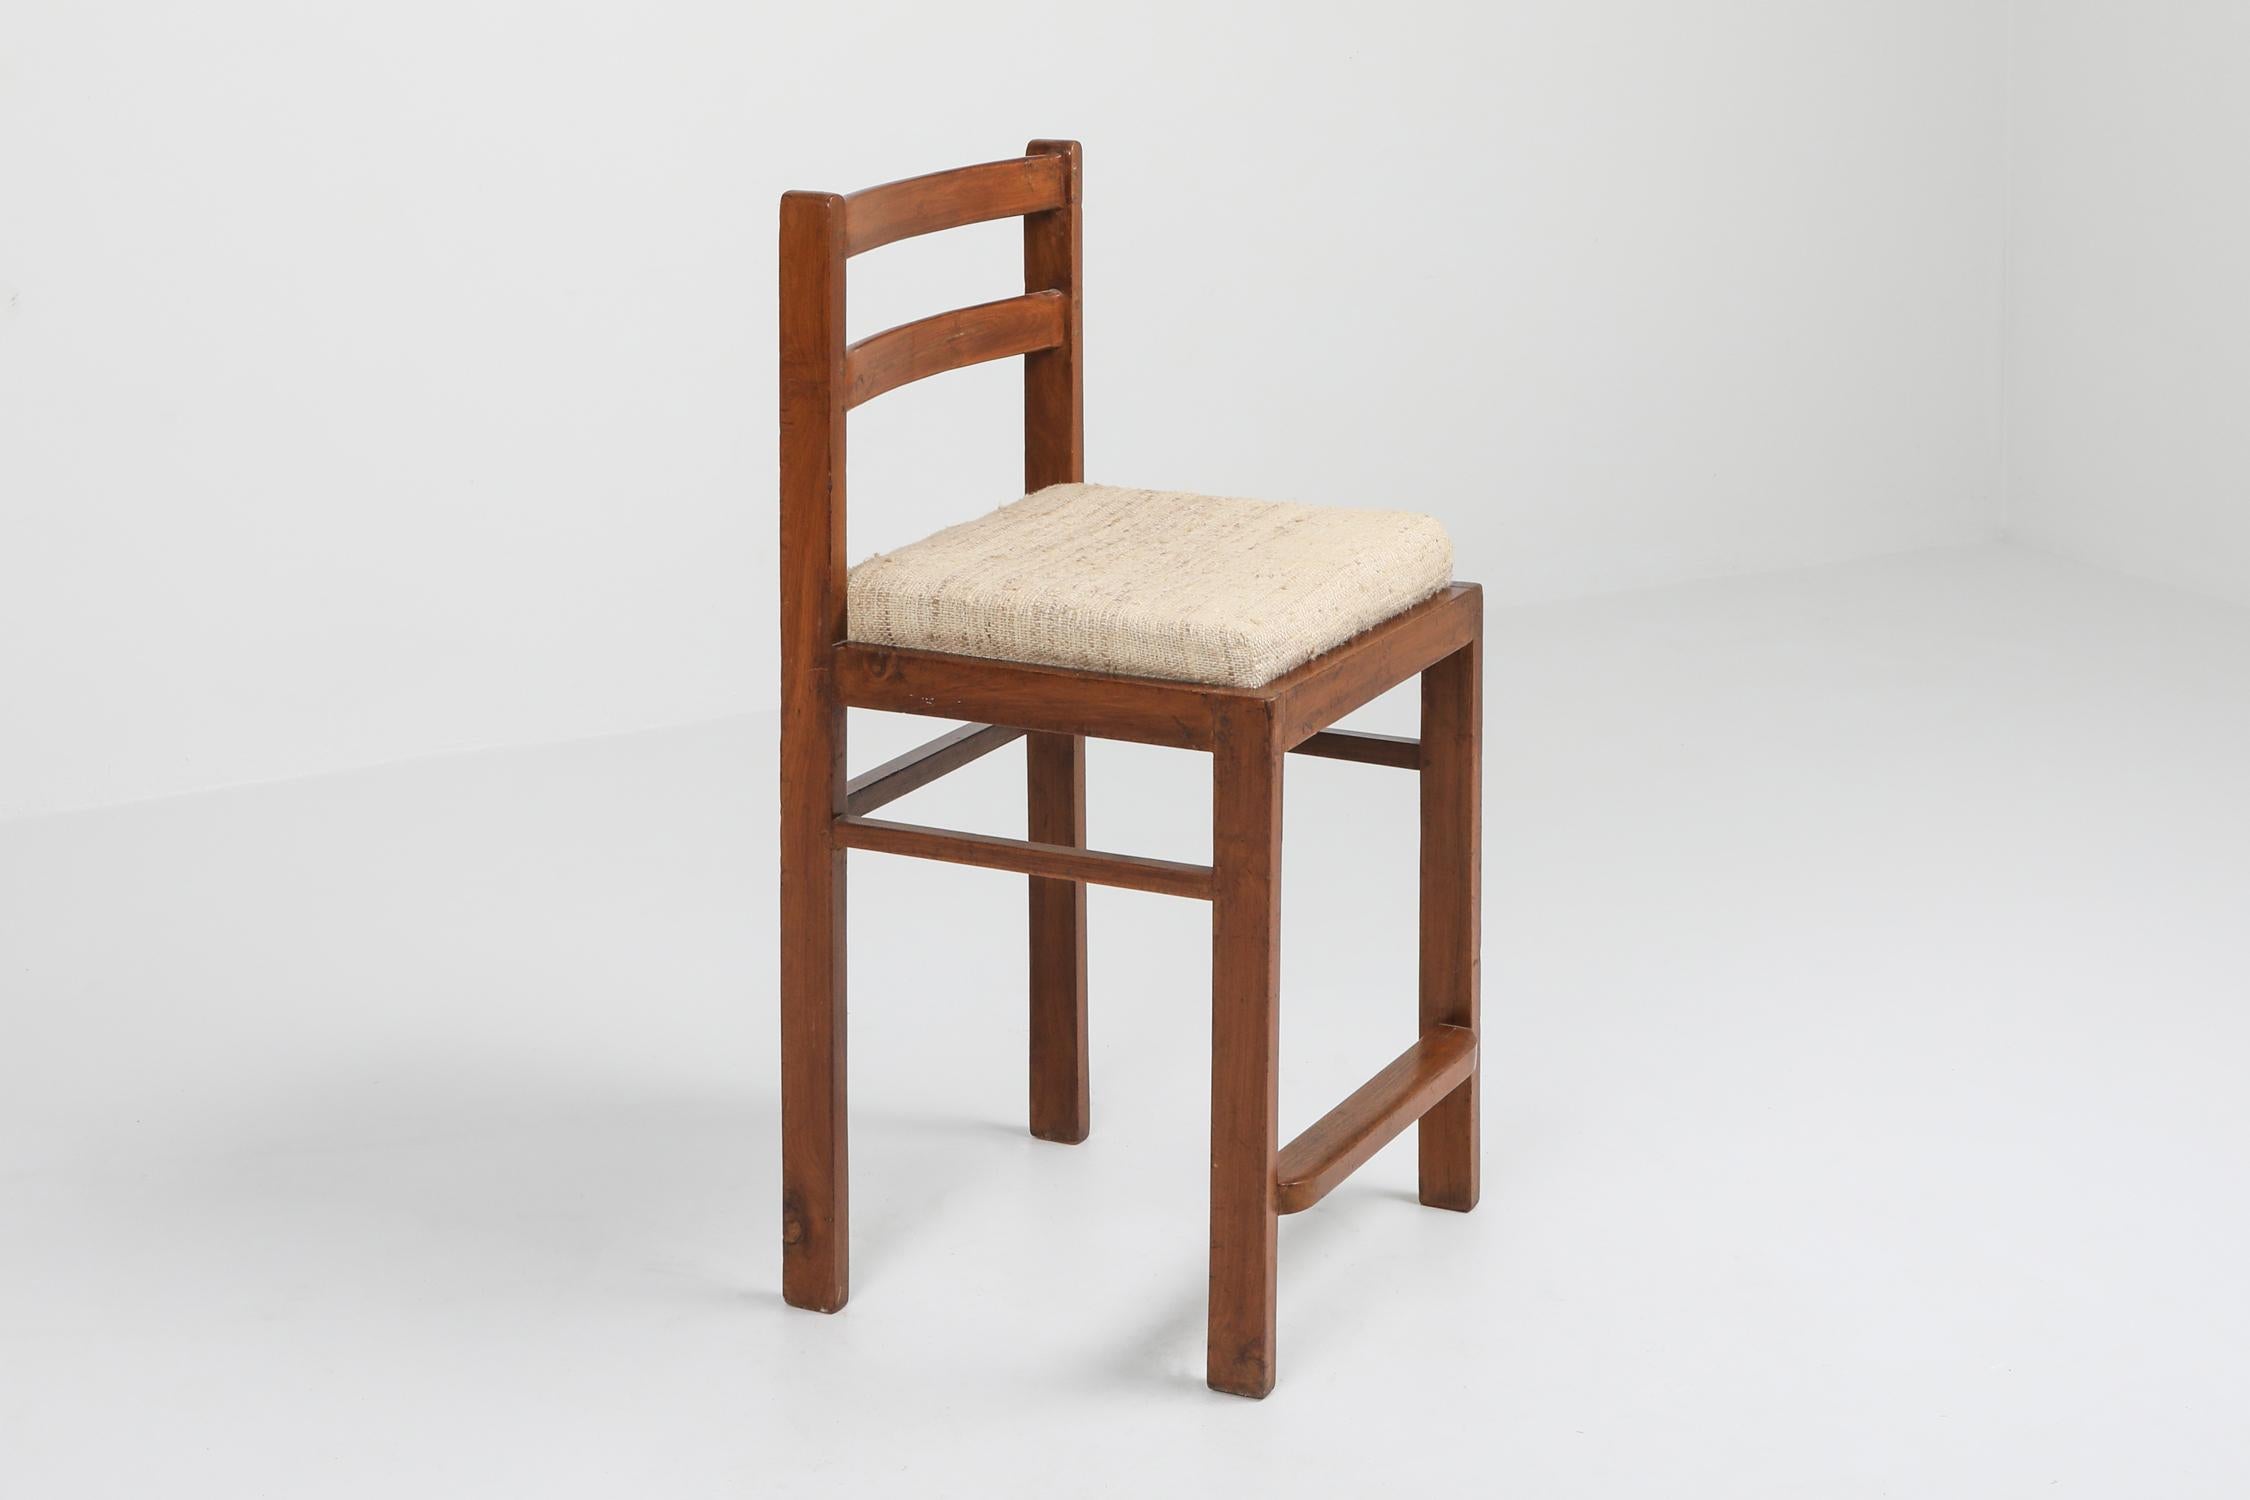 Pierre Jeanneret, Chandigarh stool
study model for Chandigarh
prototype piece
woven linen seating
Designed by Corbusier cousin, Pierre Jeanneret, France/India, circa 1960.
Literature: Le Corbusier Pierre Jeanneret: The Indian Adventure,